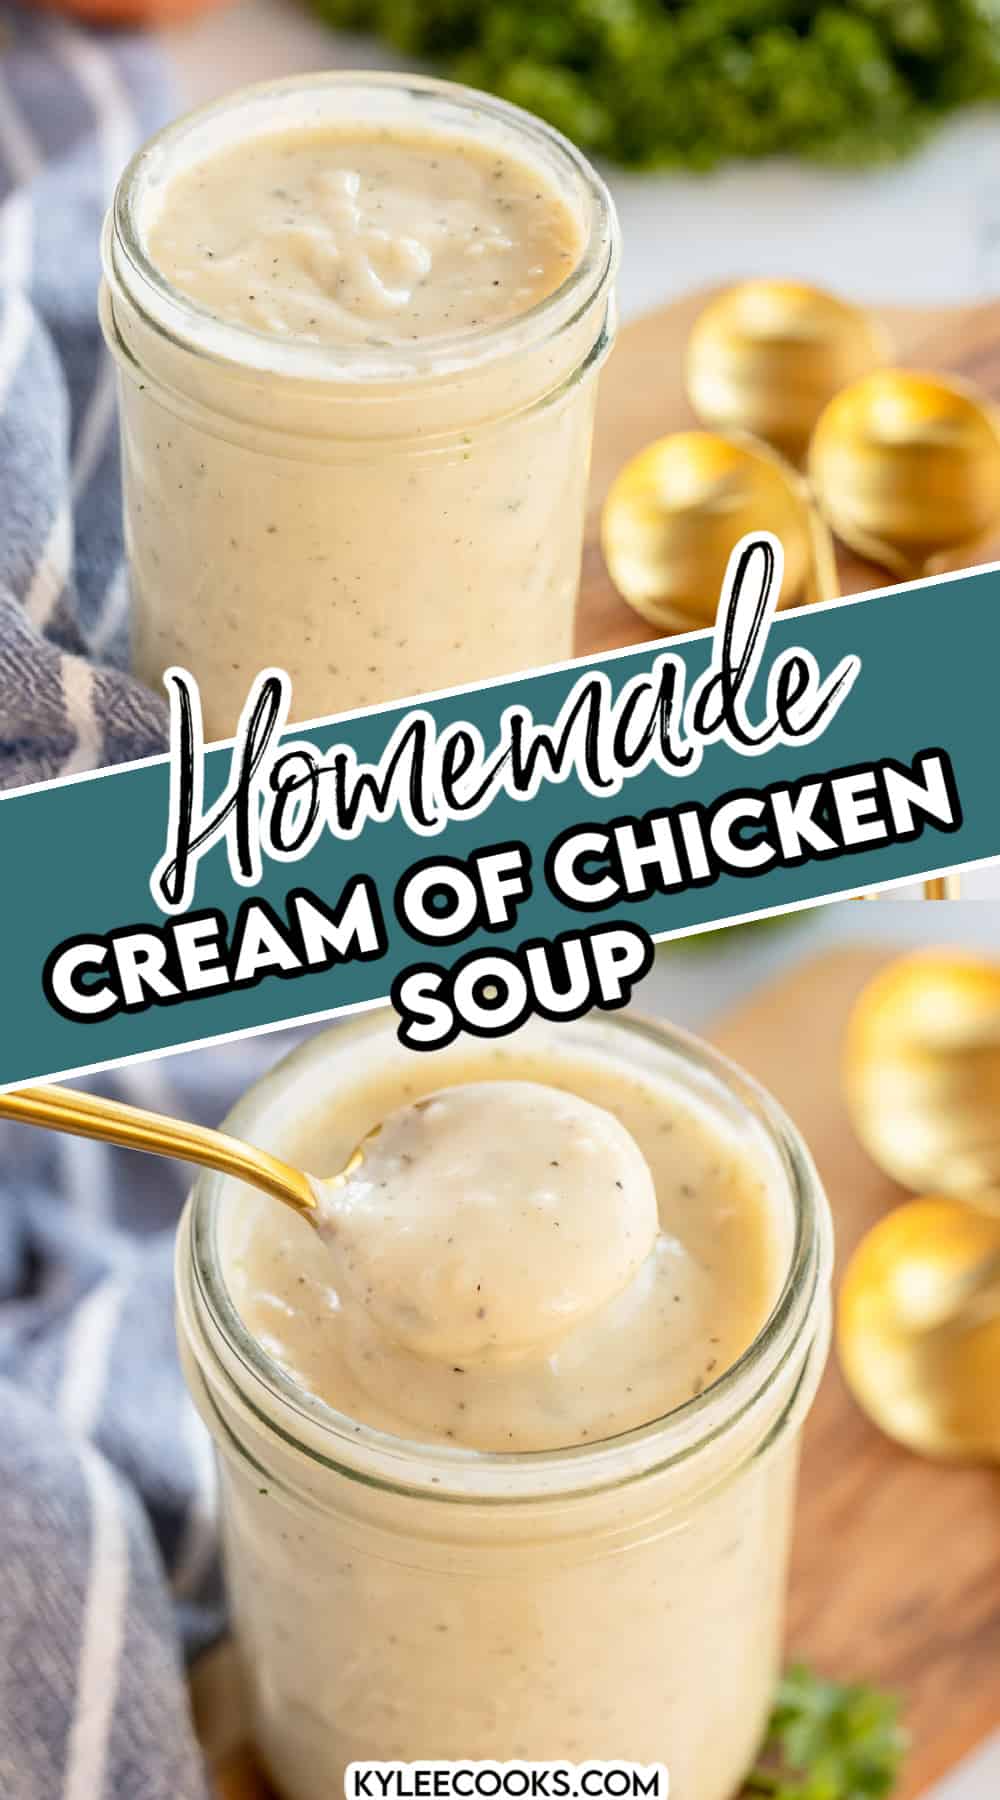 collage of homemade cream of chicken soup with text overlay that says cream of chicken soup.